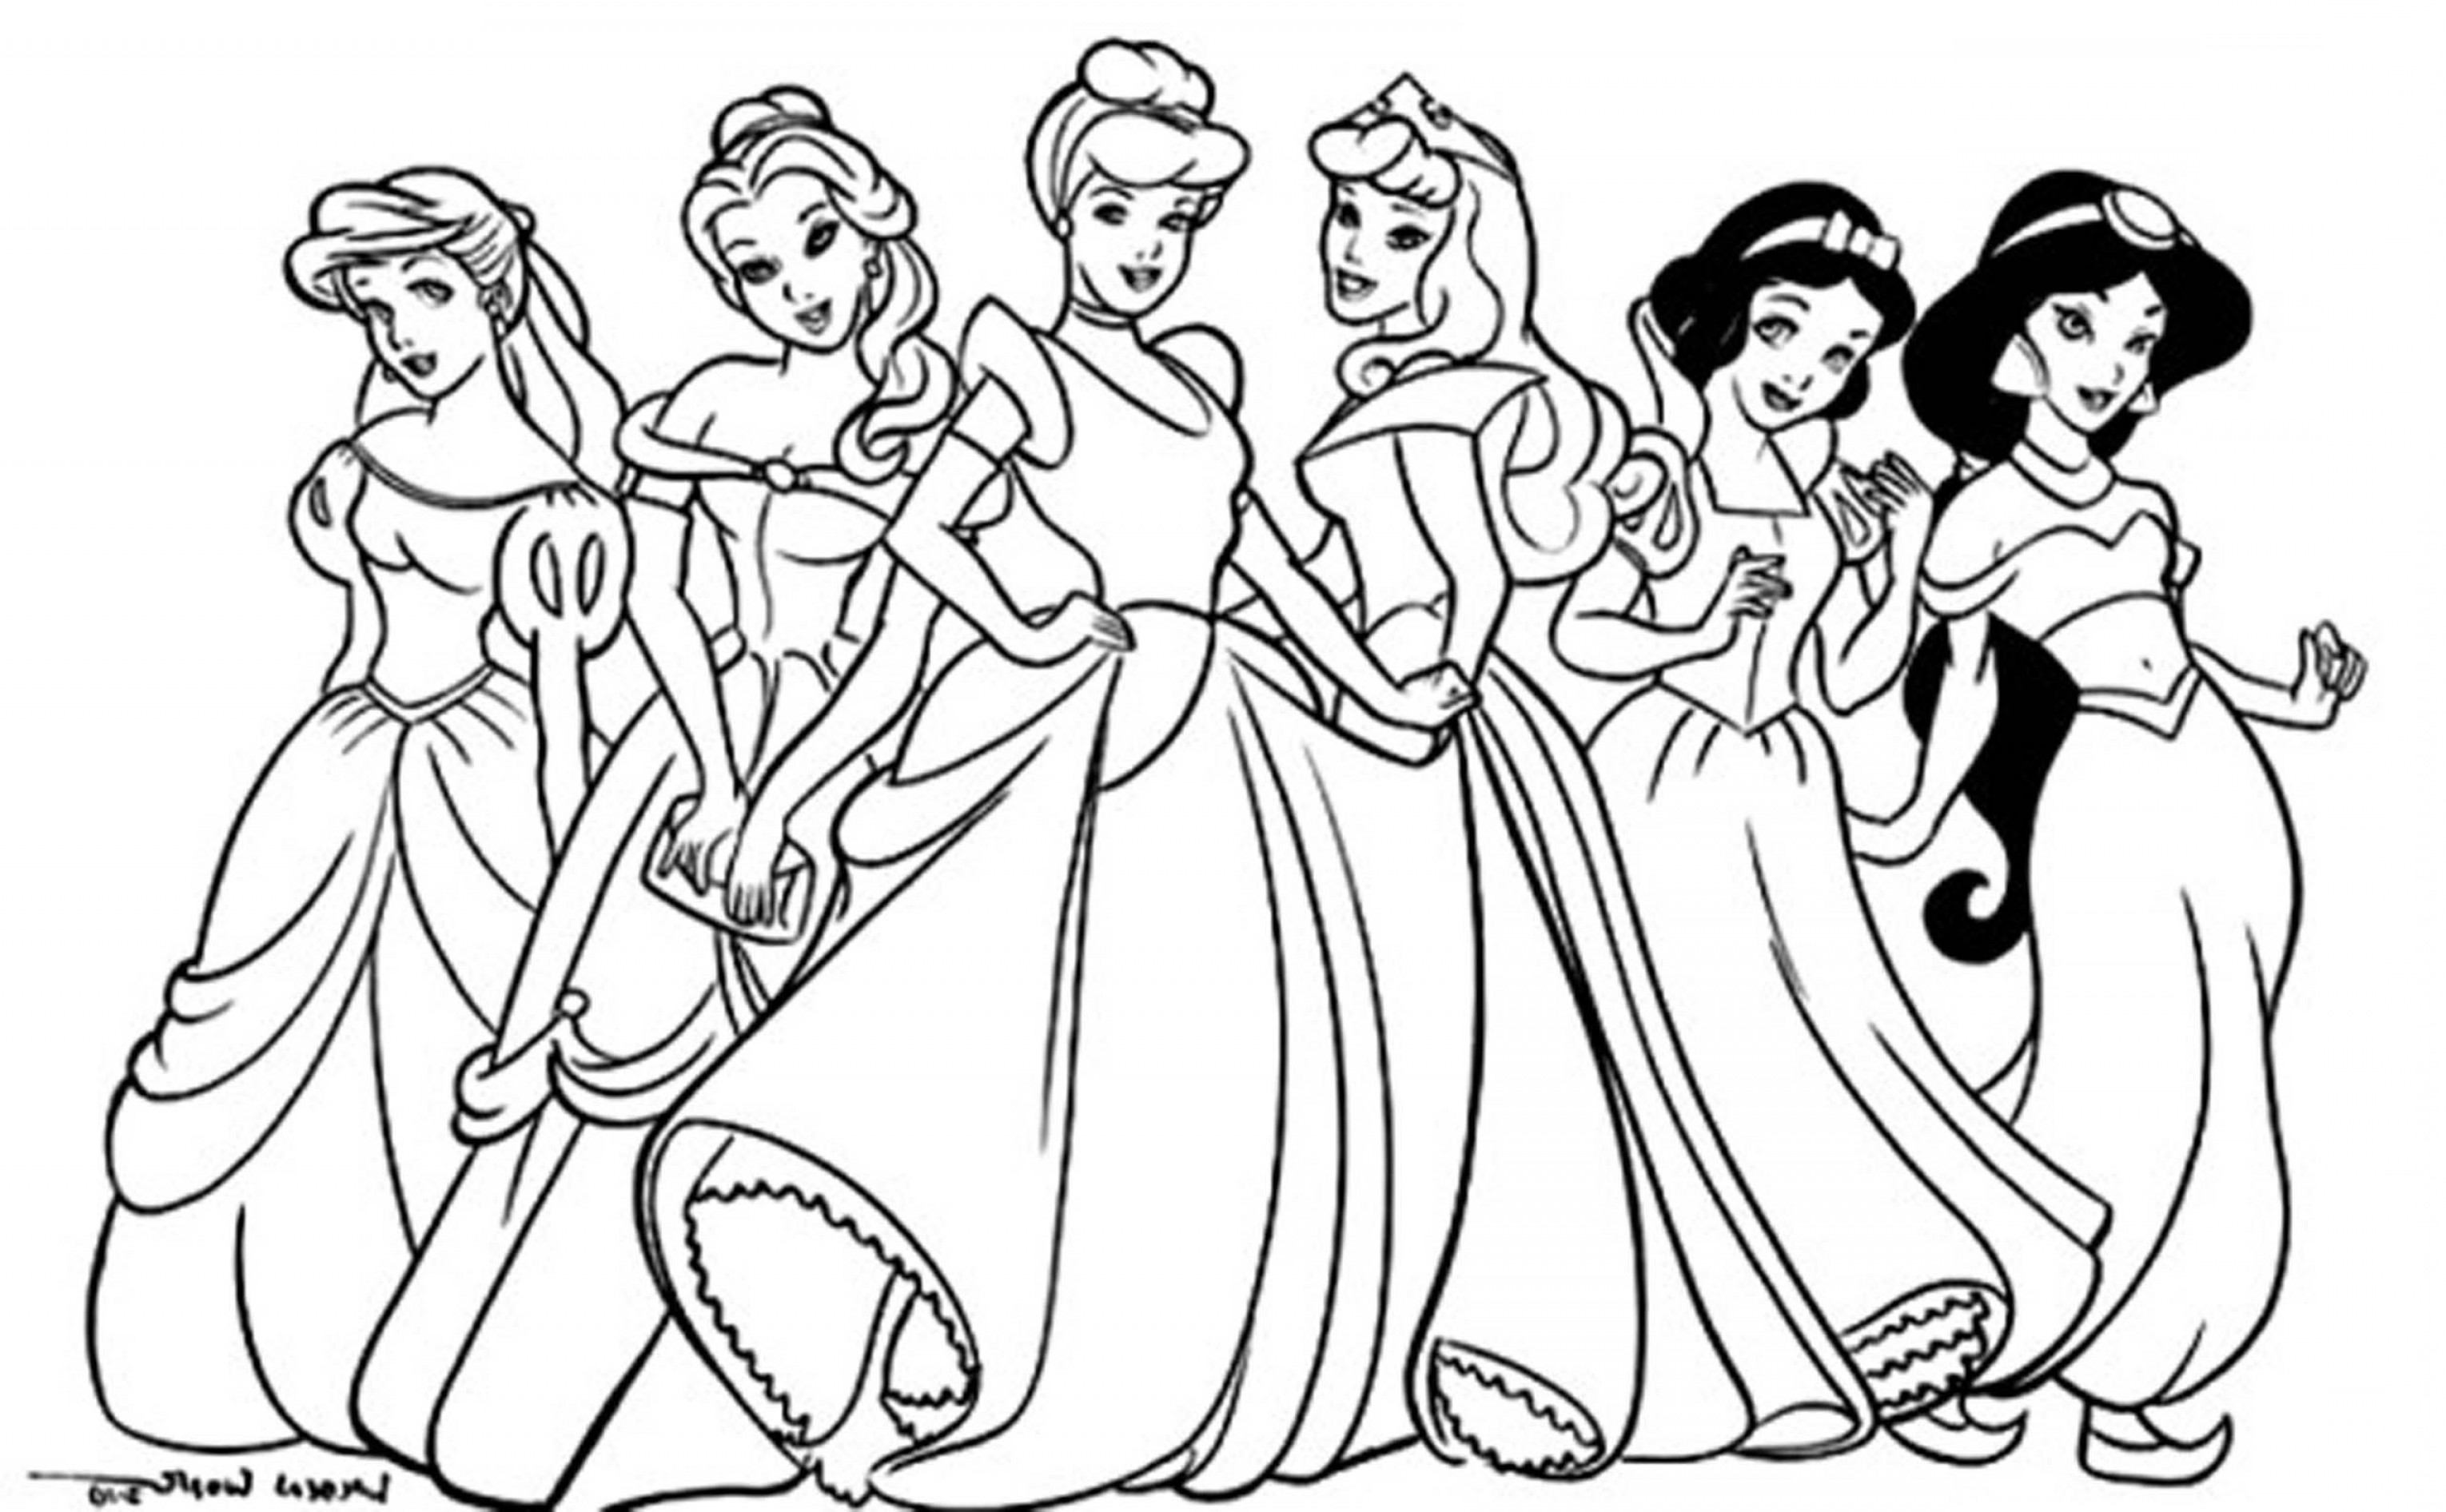 Coloring Pages : Fabulous Disneycesstables Coloring Pages ...